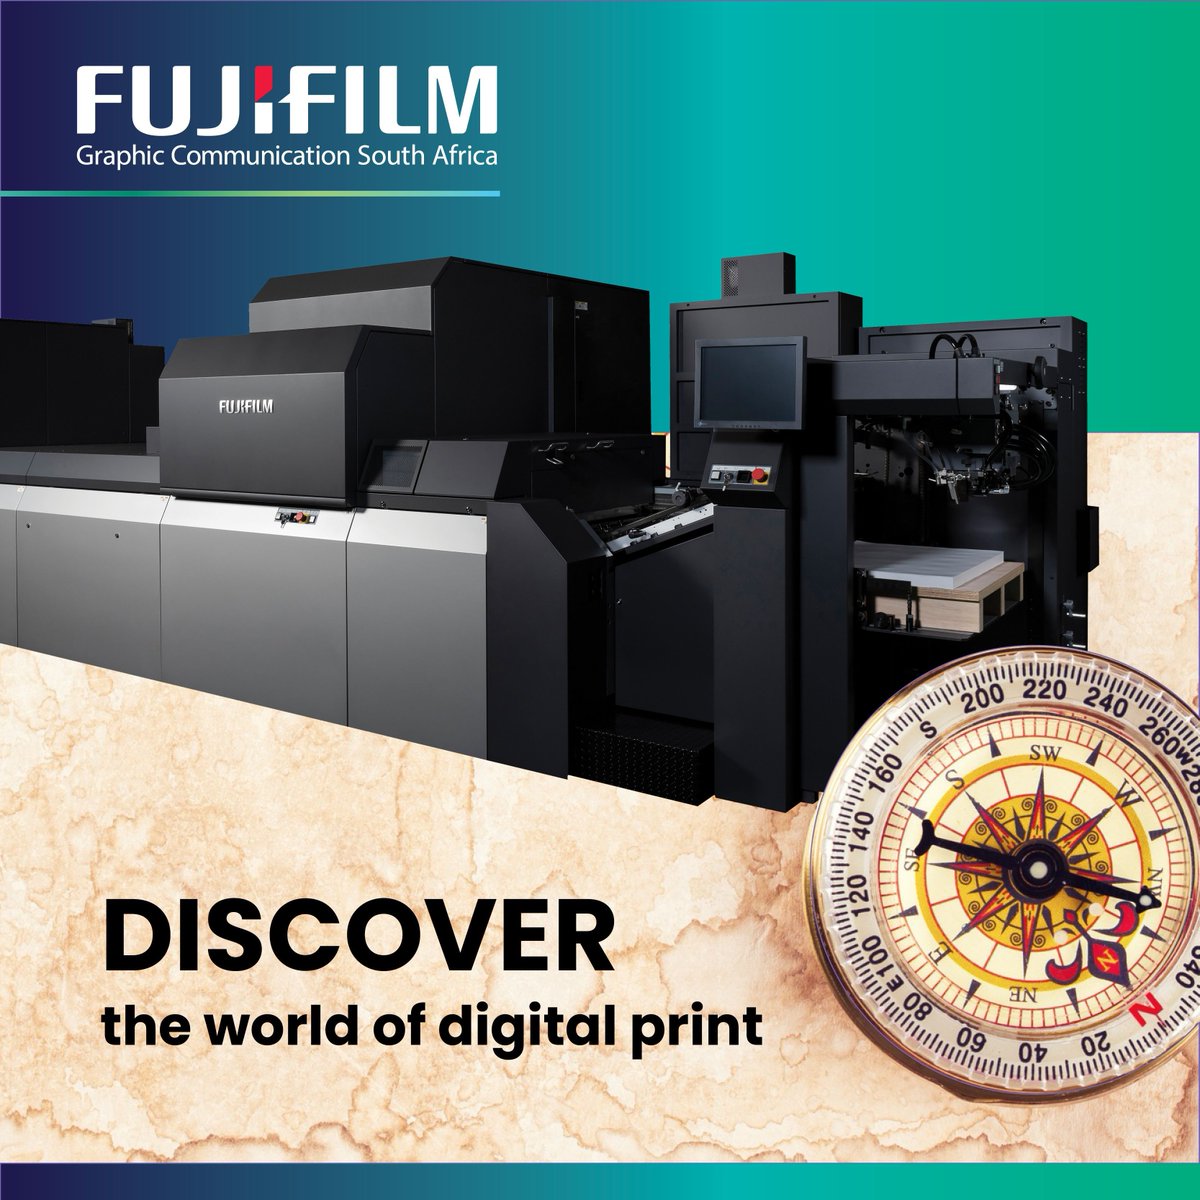 Discover the world of digital print with FUJIFILM Graphic Communication. Our cutting-edge technology ensures vibrant colours and sharp details in every print. 

Visit our website to find out more: buff.ly/3QiIC8N 

#DigitalPrinting #PrintTechnology